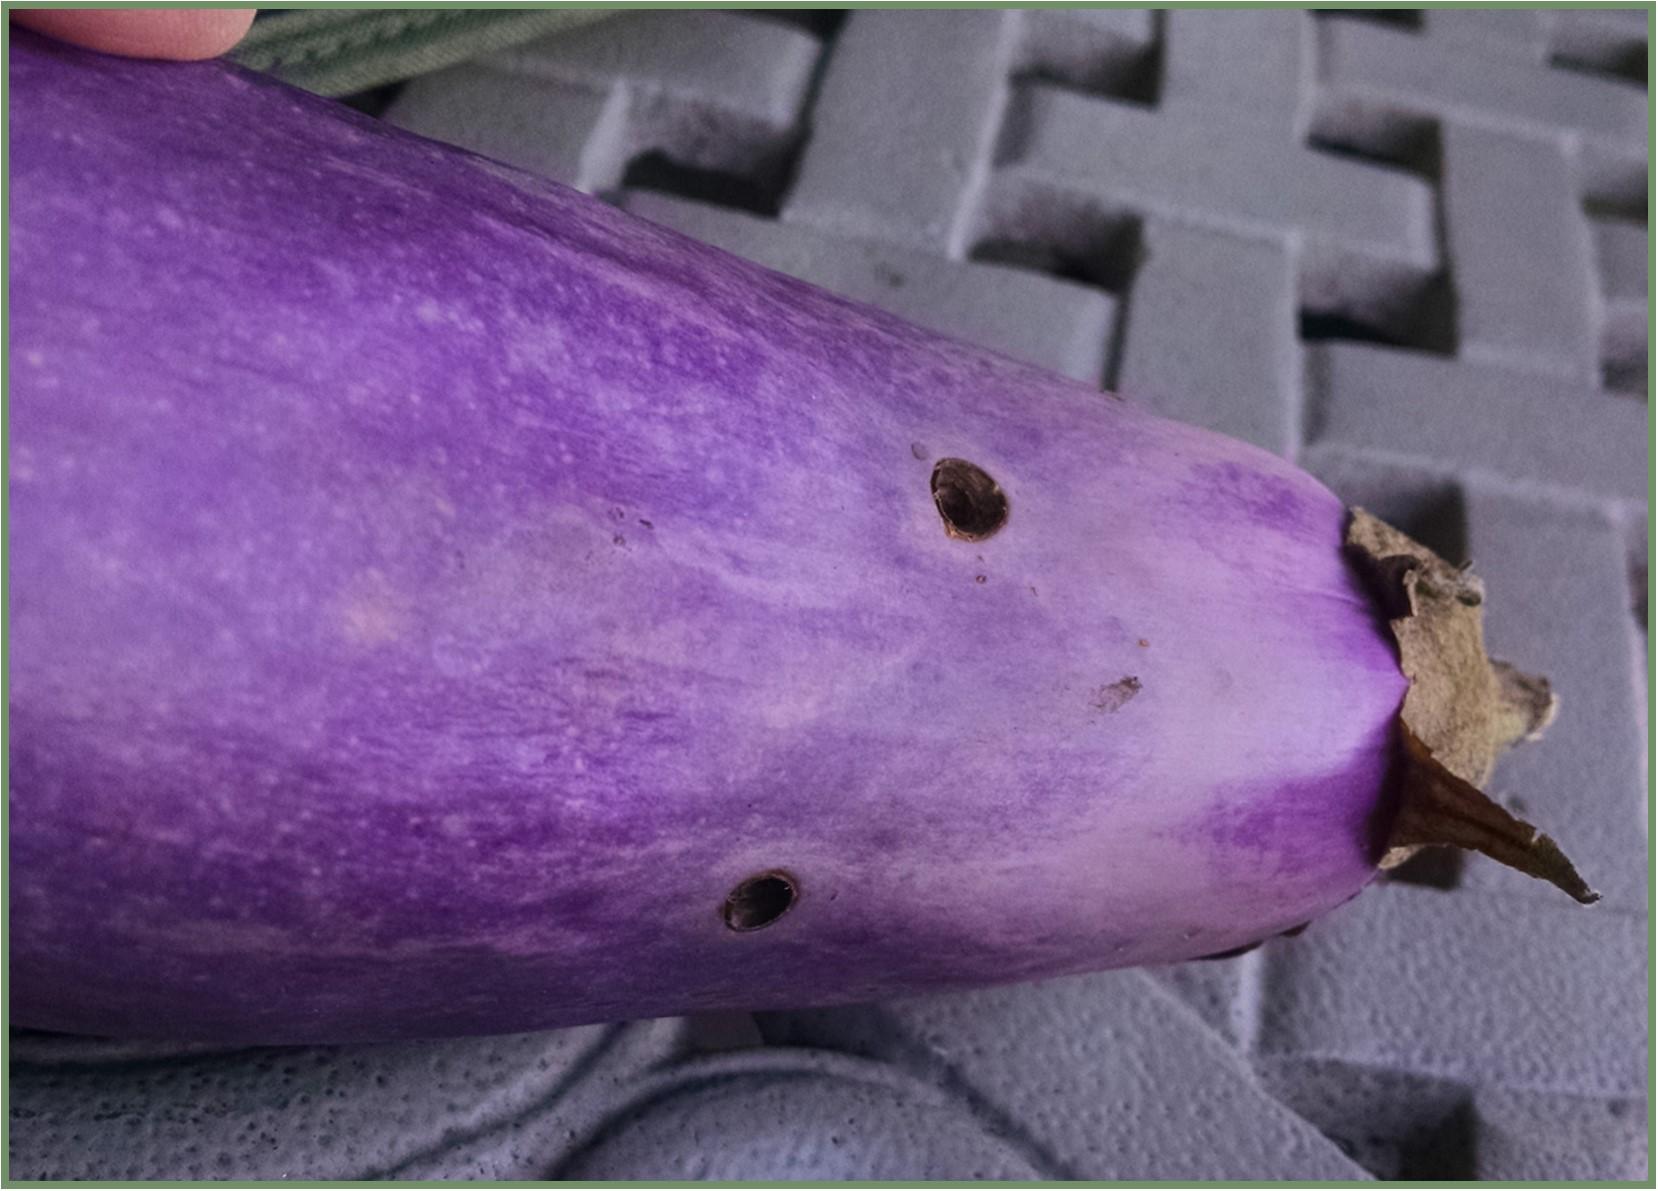 Figure 17: The holes in this eggplant are an example of the kind of cosmetic damage that insect feeding can cause. Photo by Neith Little.